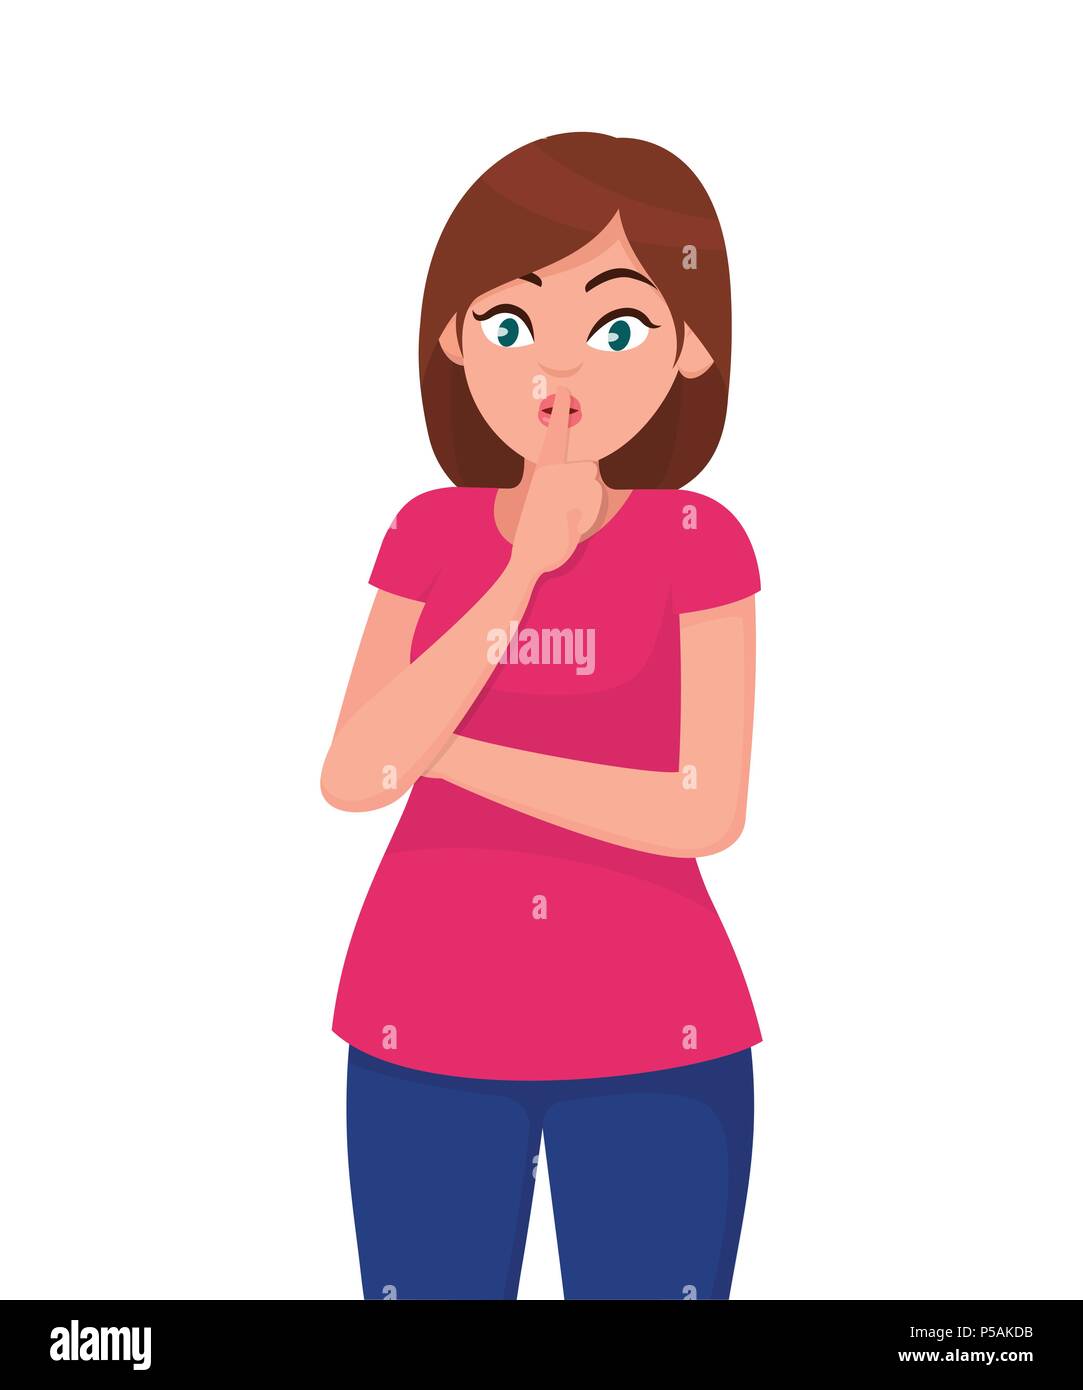 Young woman asking silence. Silence please! Keep quiet. Shh!  Human emotion and body language concept illustration in vector cartoon flat style. Stock Vector